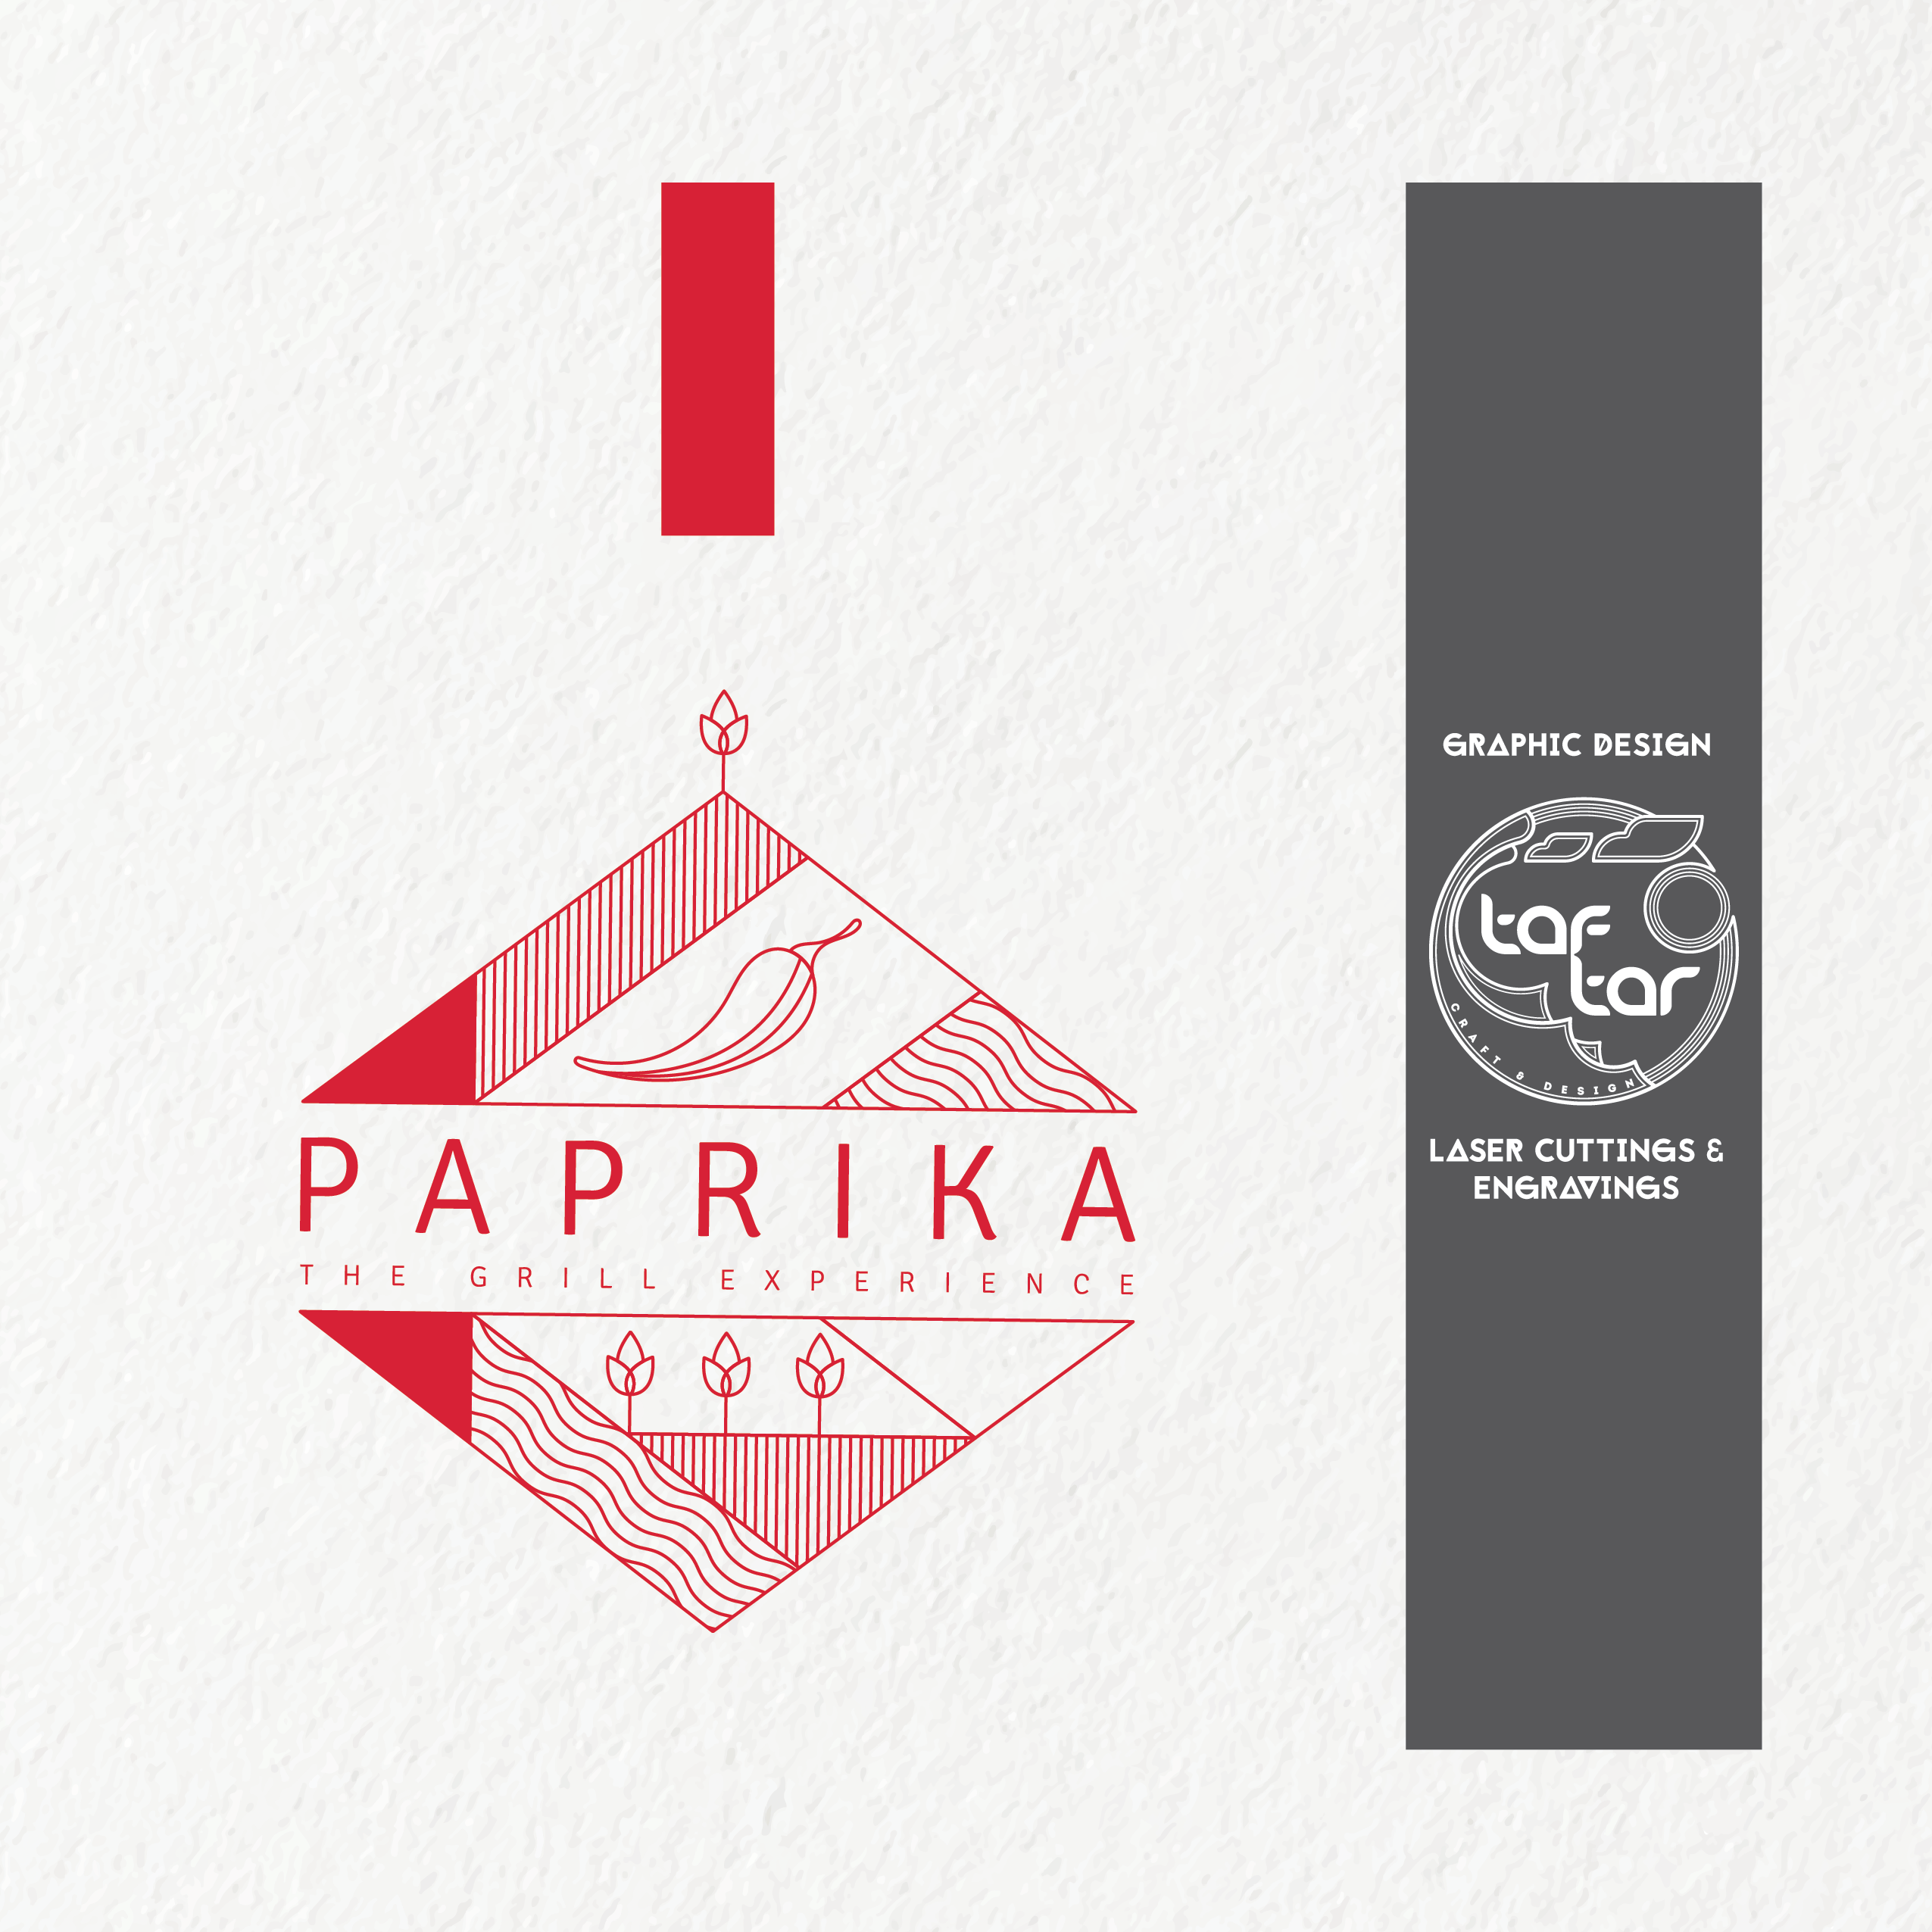 Paprika - The Grill Experience